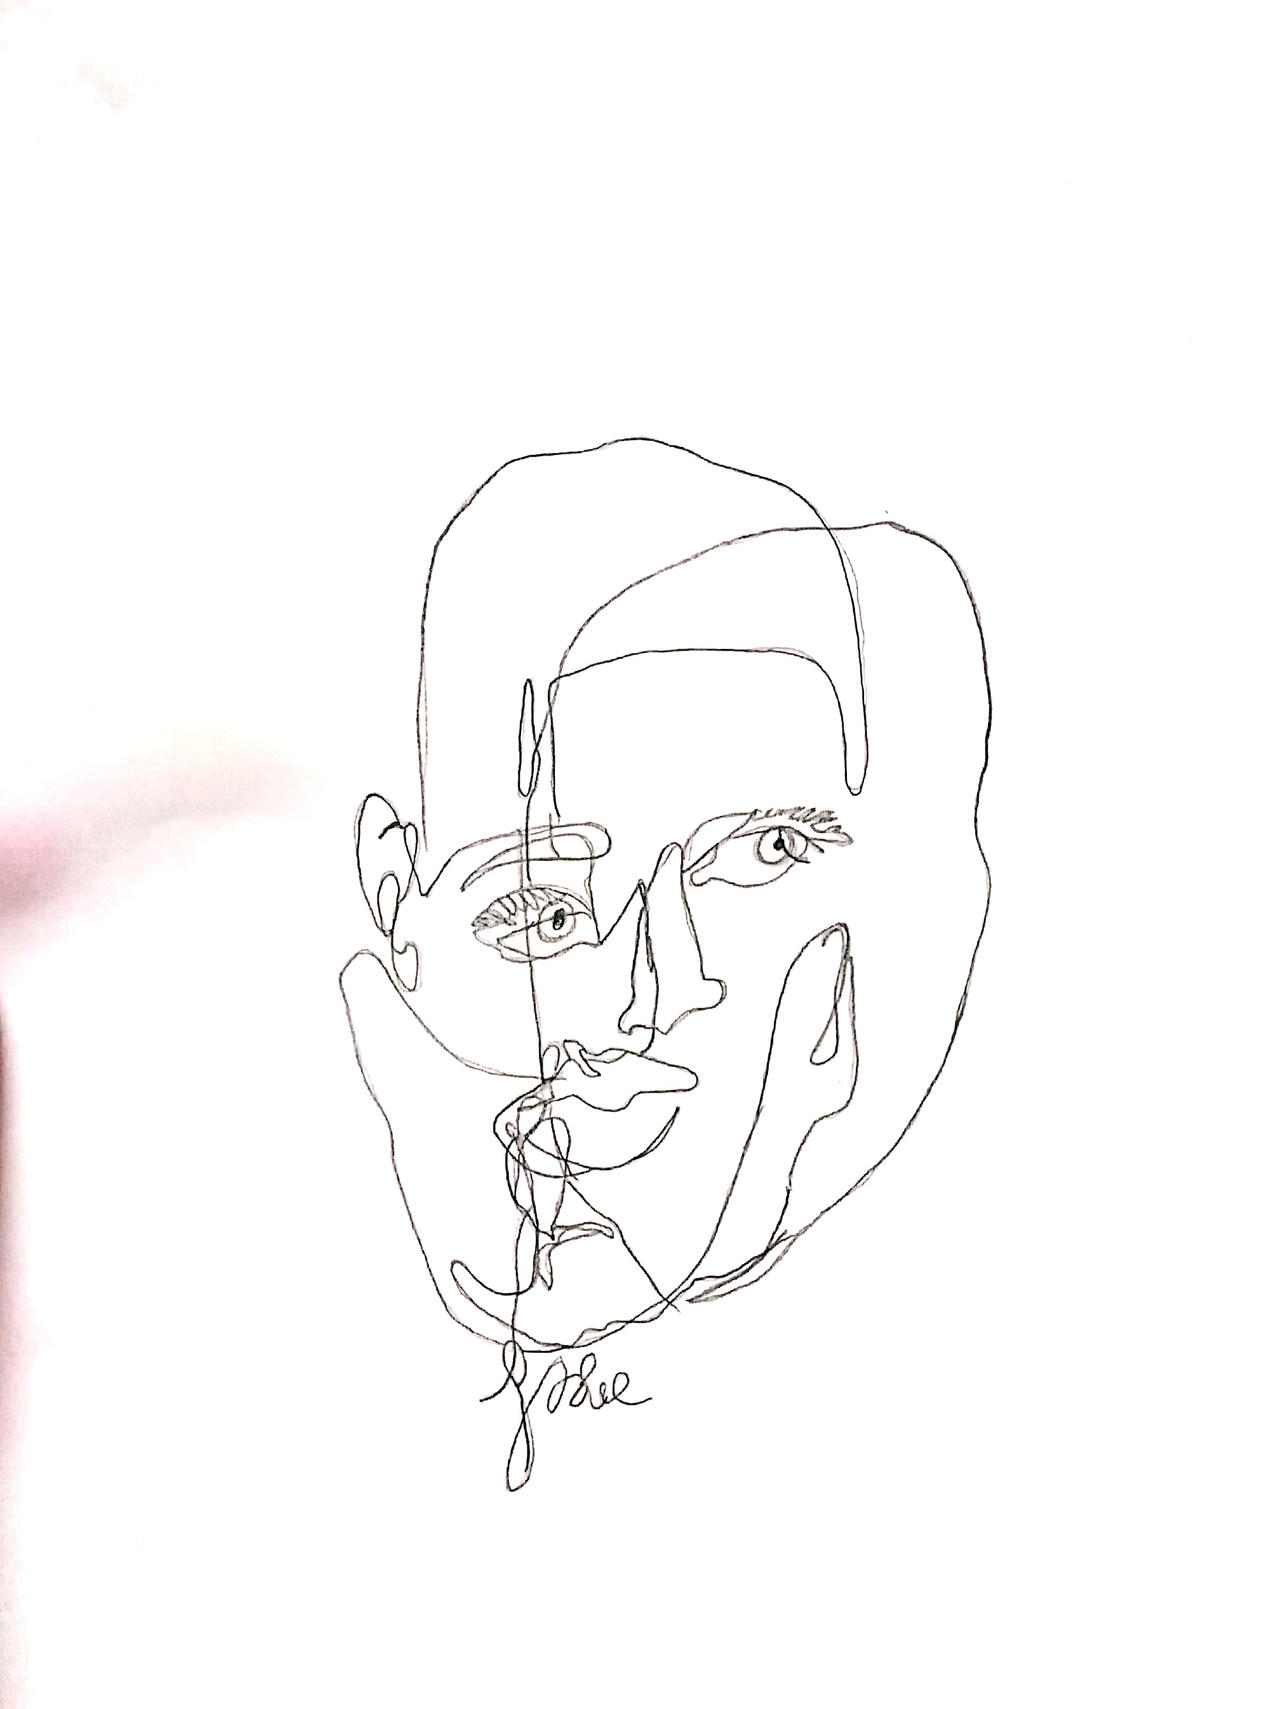 The First Blind contour drawing of a face by Kailee1101 on DeviantArt